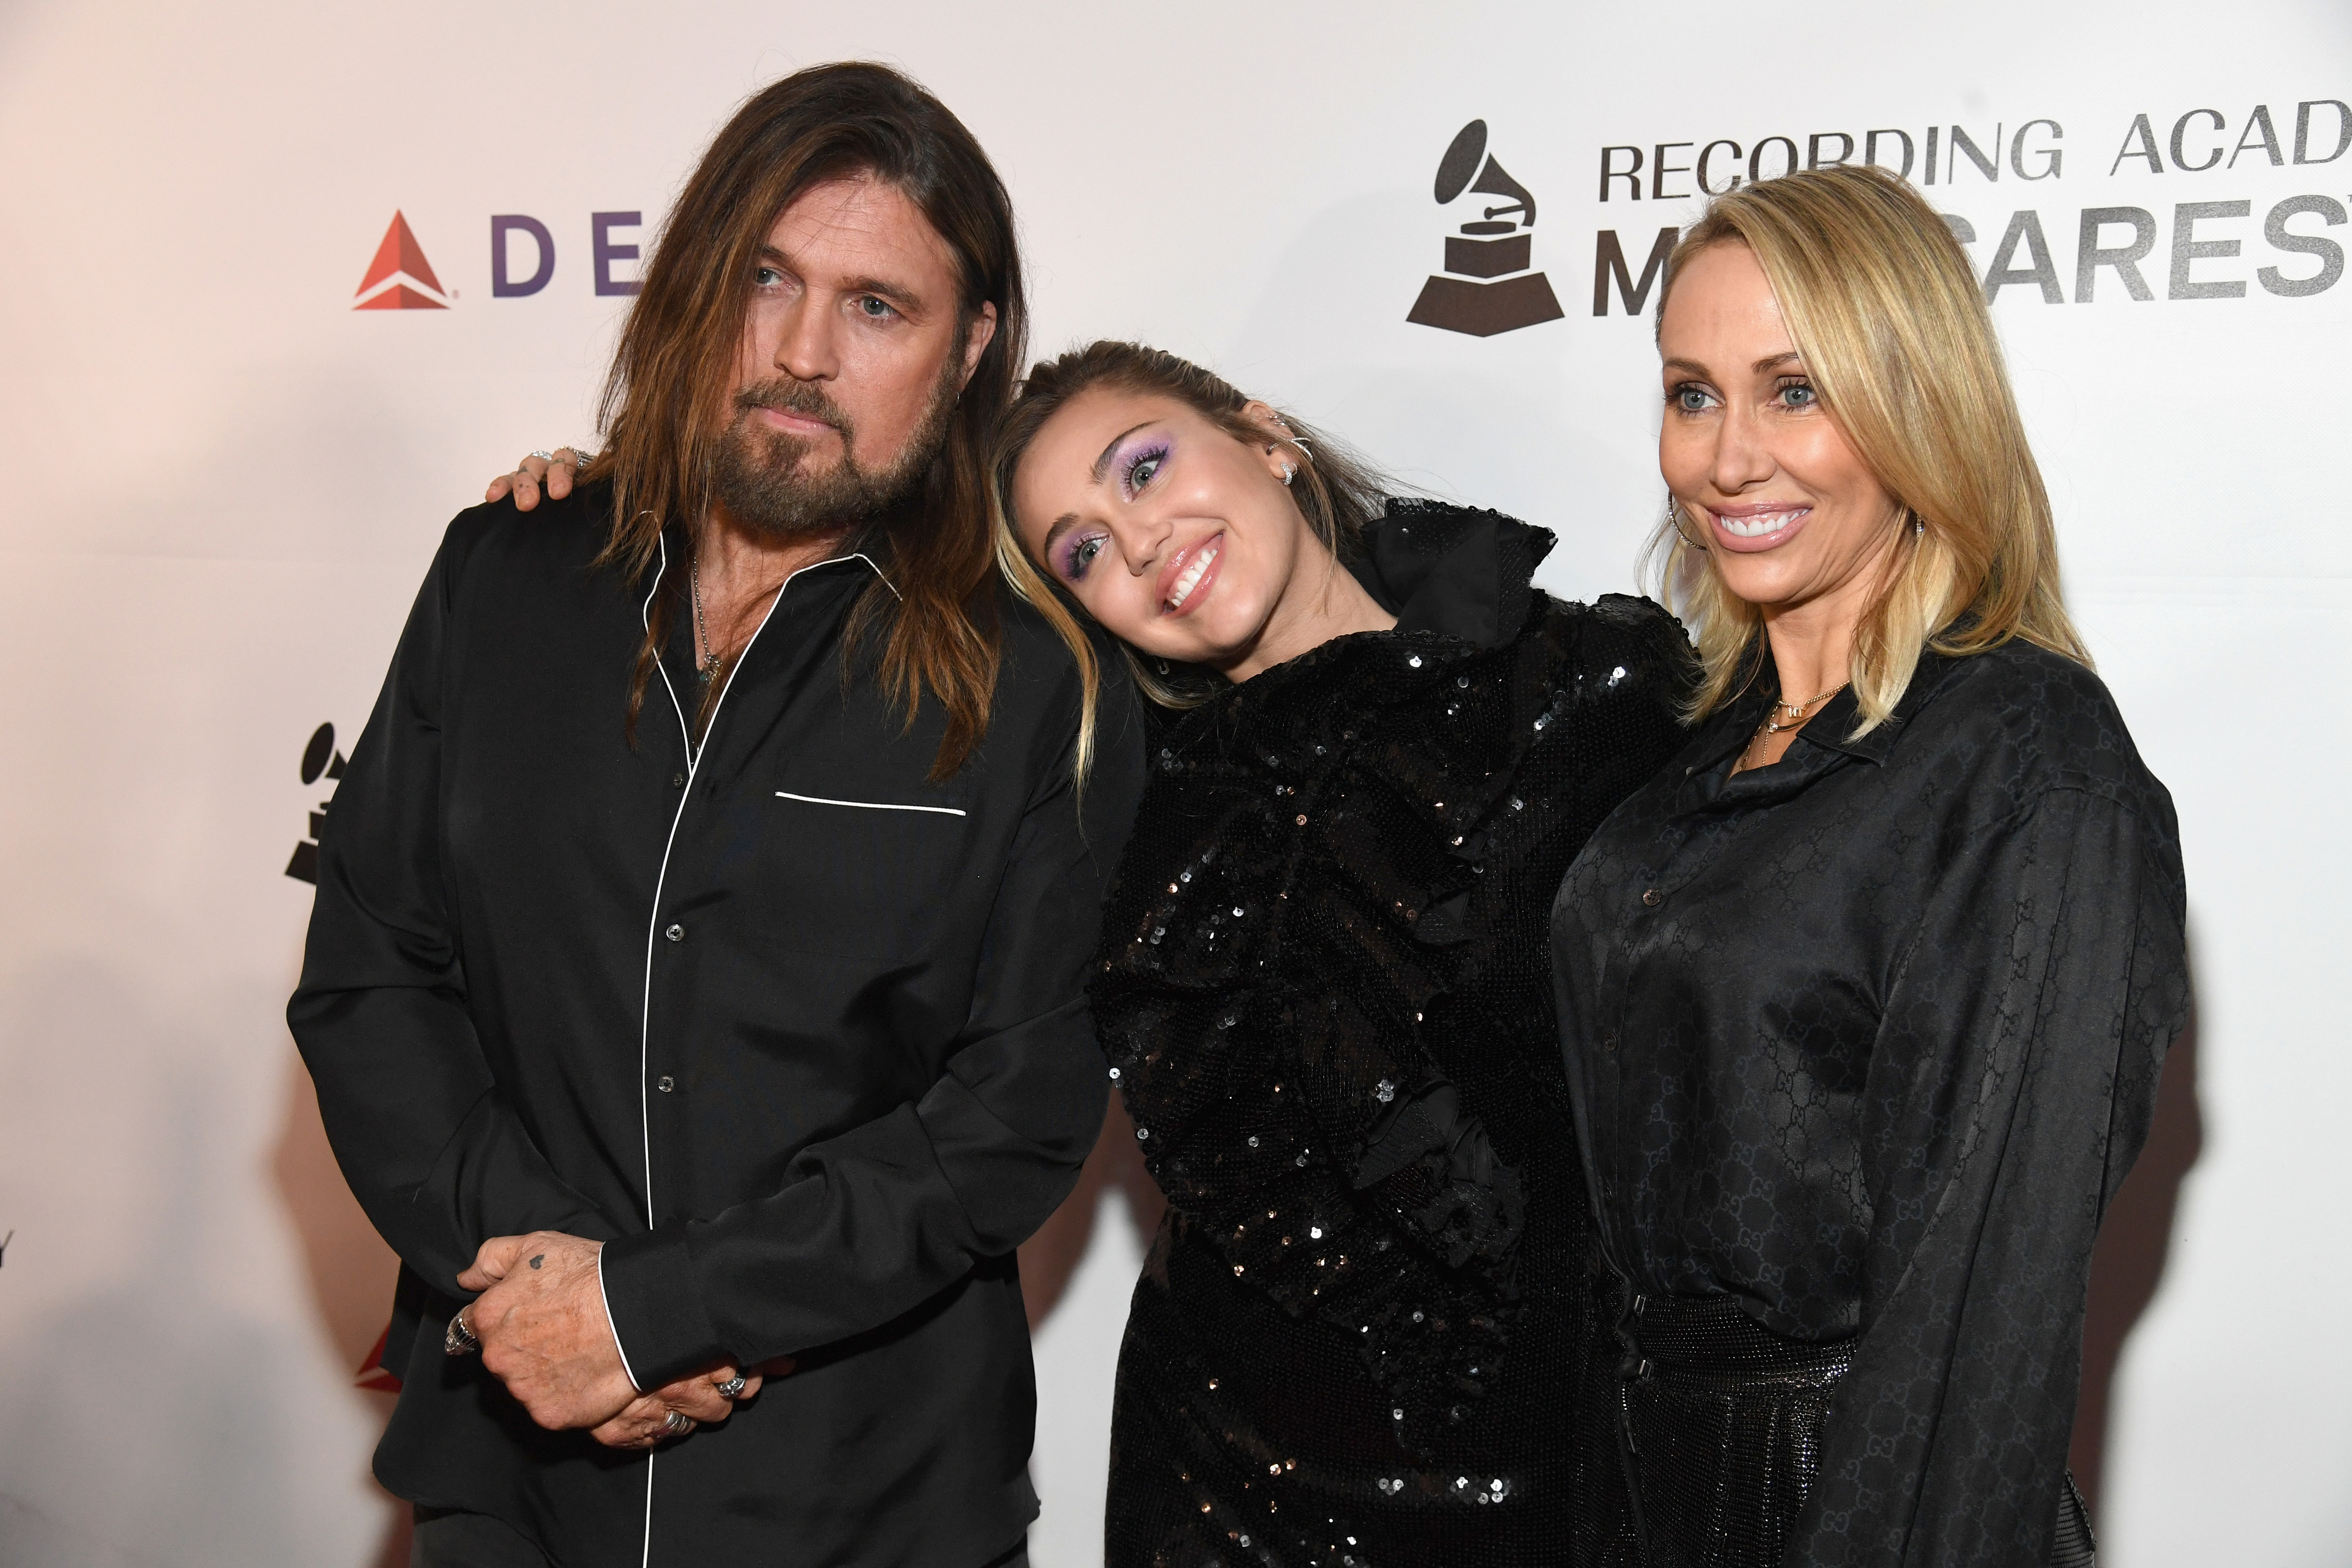 Billy Ray Cyrus, Miley Cyrus, and Tish Cyrus pose together at an event; Miley wears a sparkling black outfit